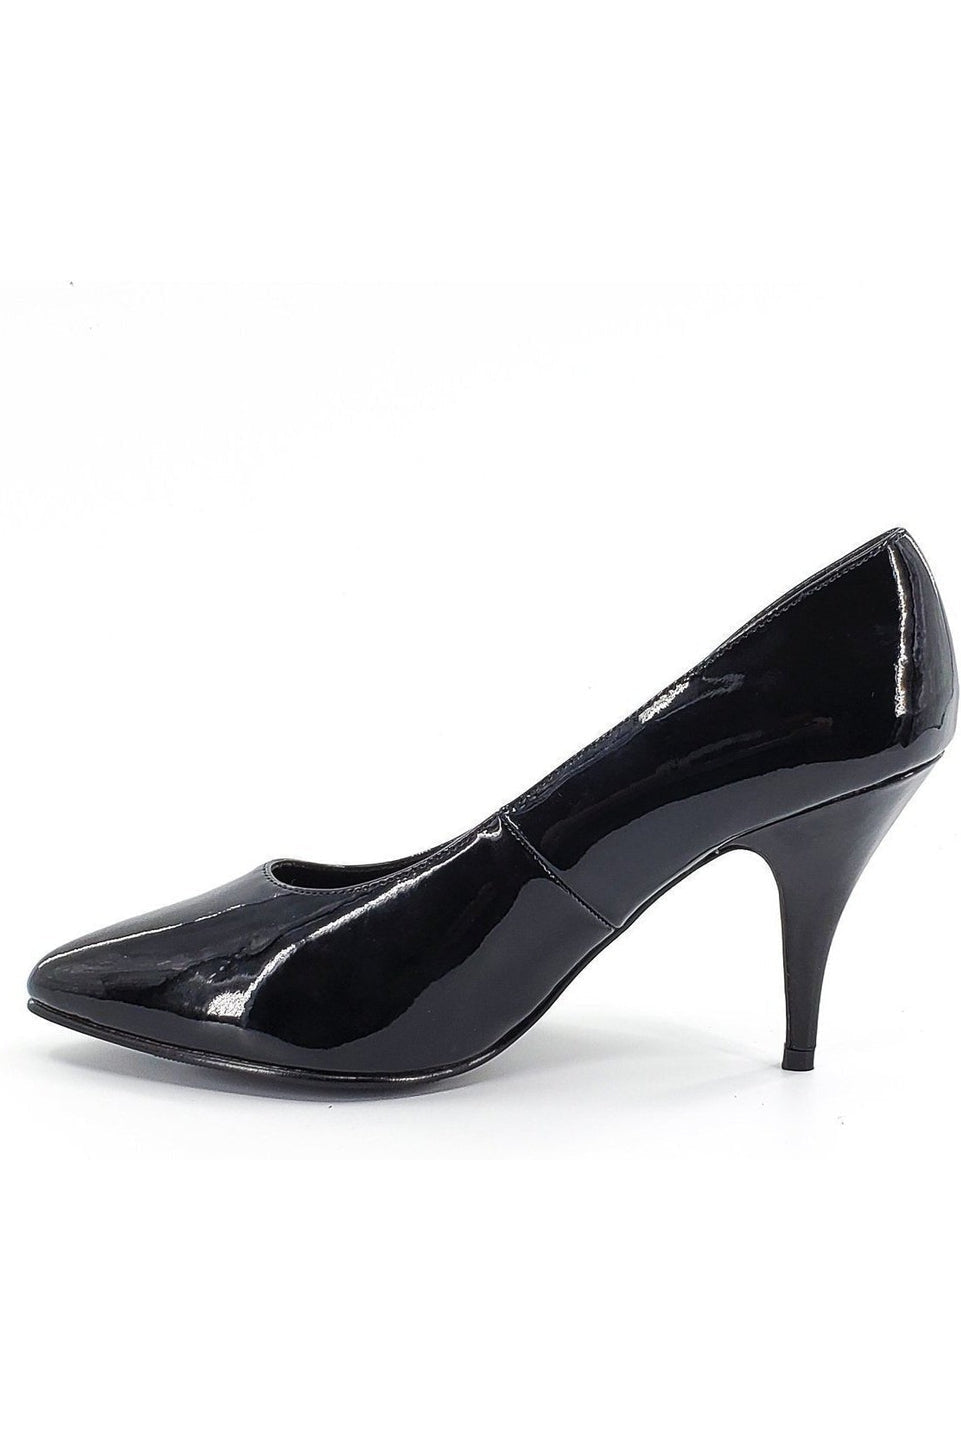 8902-Wide Classic Pump | Black Patent-Sexyshoes Brand-SEXYSHOES.COM